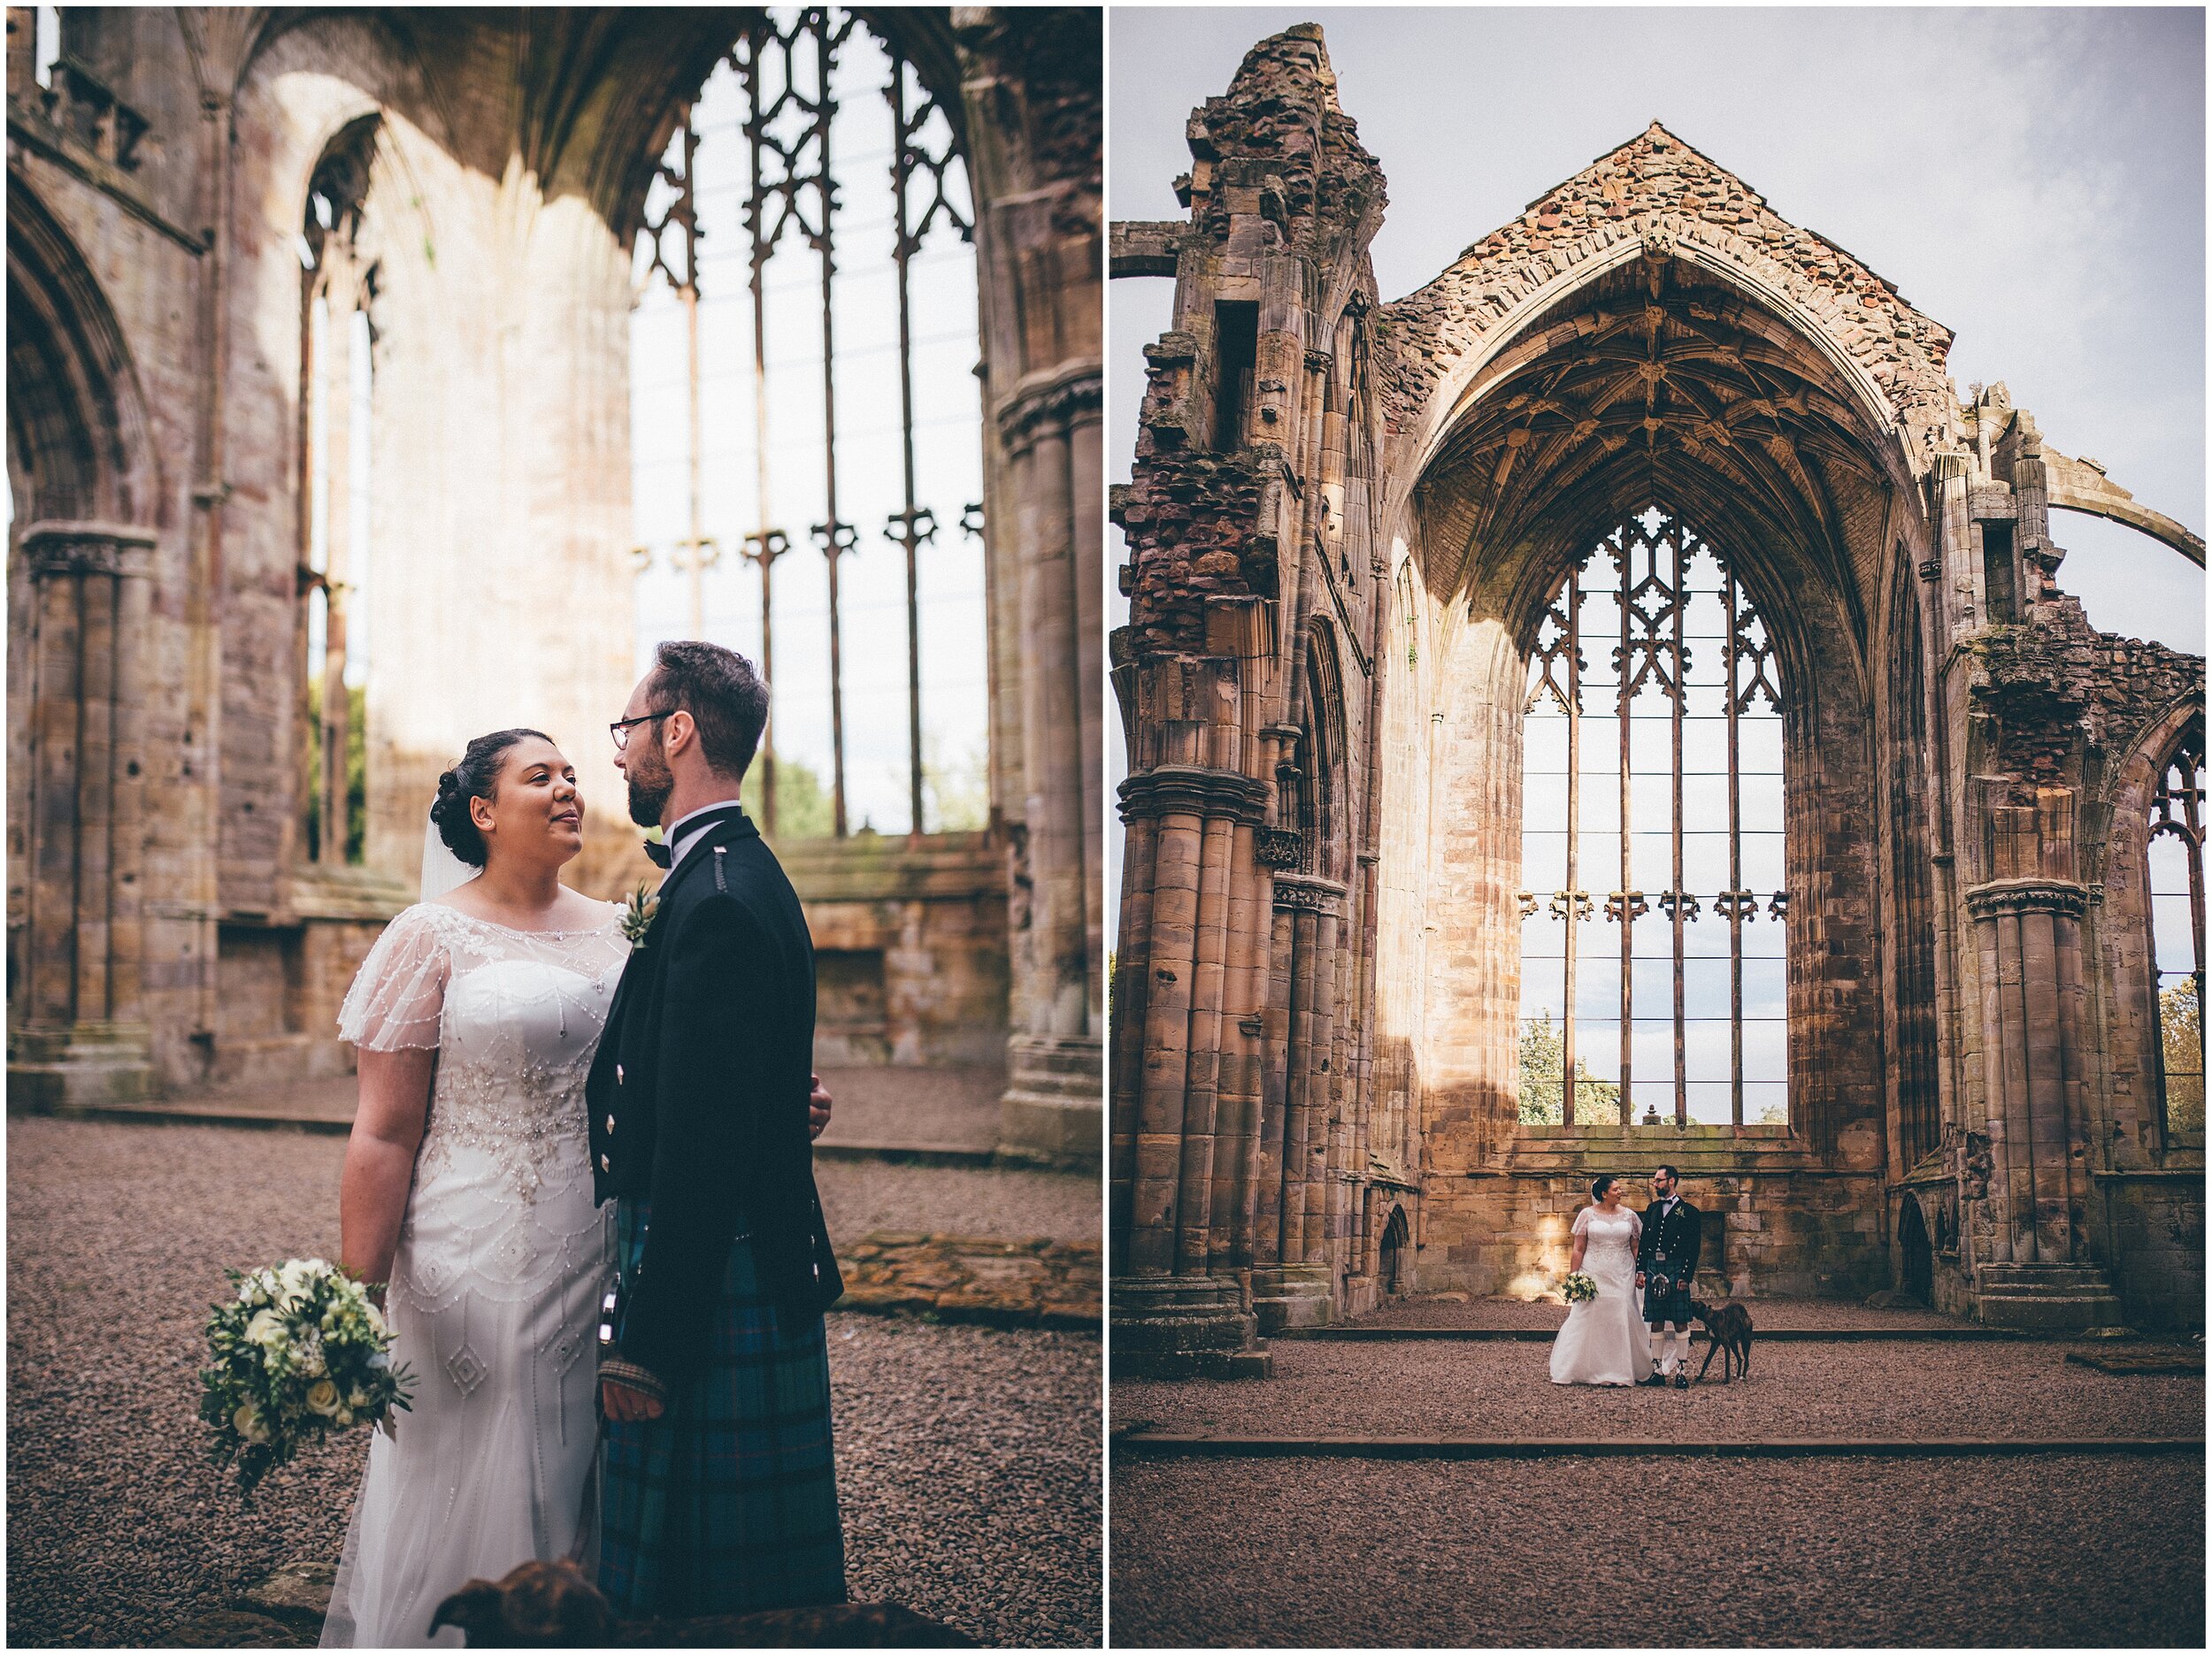 Wedding at a wedding in Melrose Abbey on Scottish Borders.